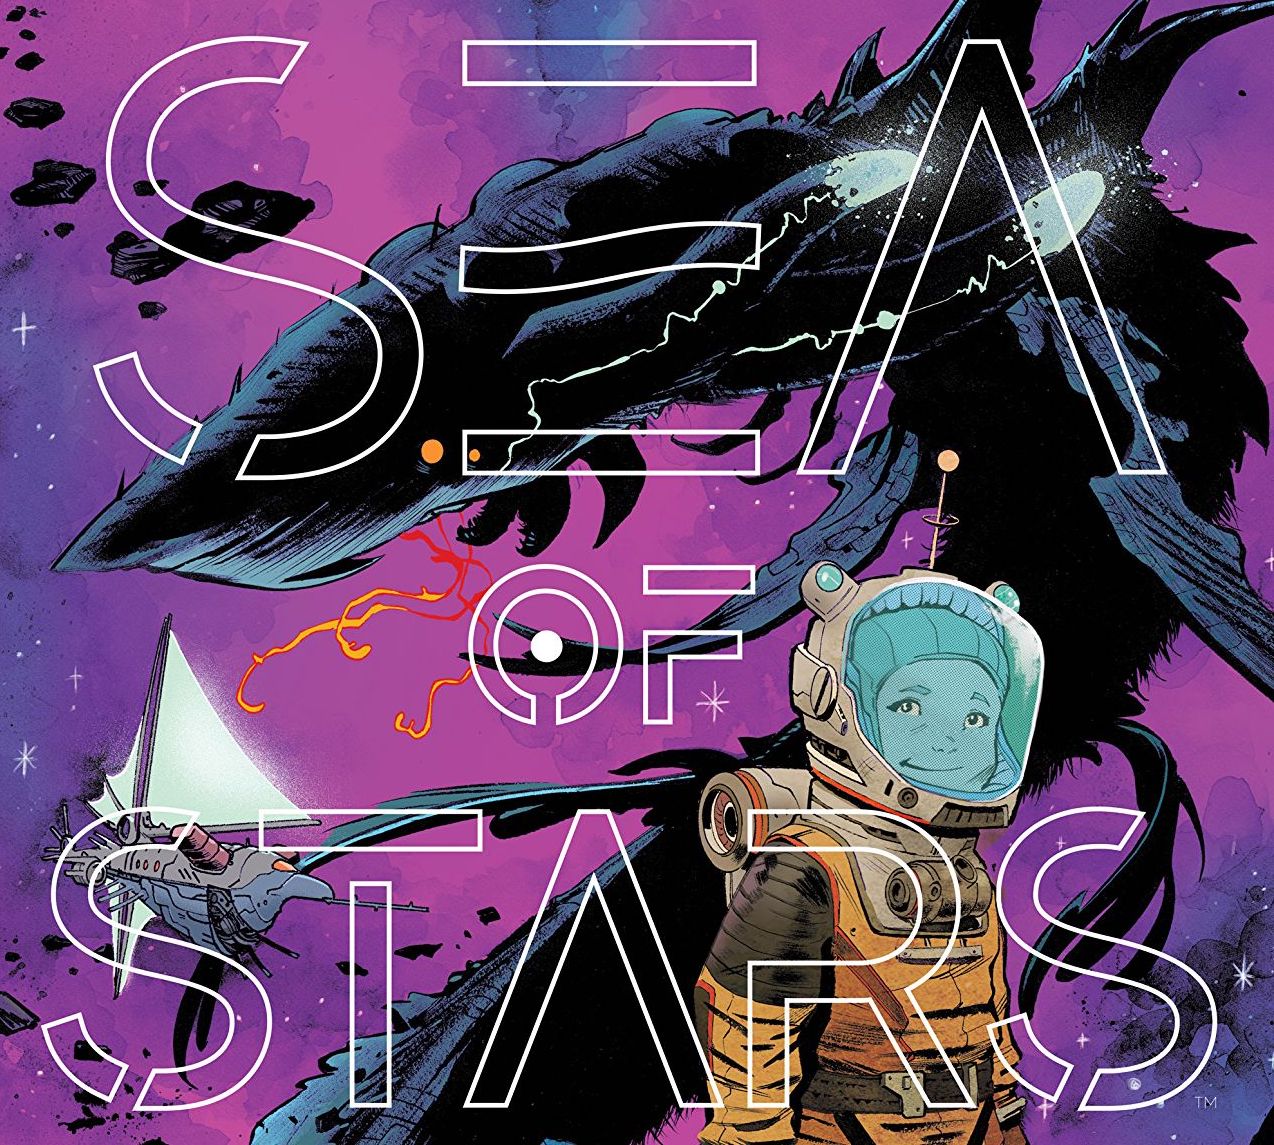 Sea of Stars #1 review: a tumultuous separation